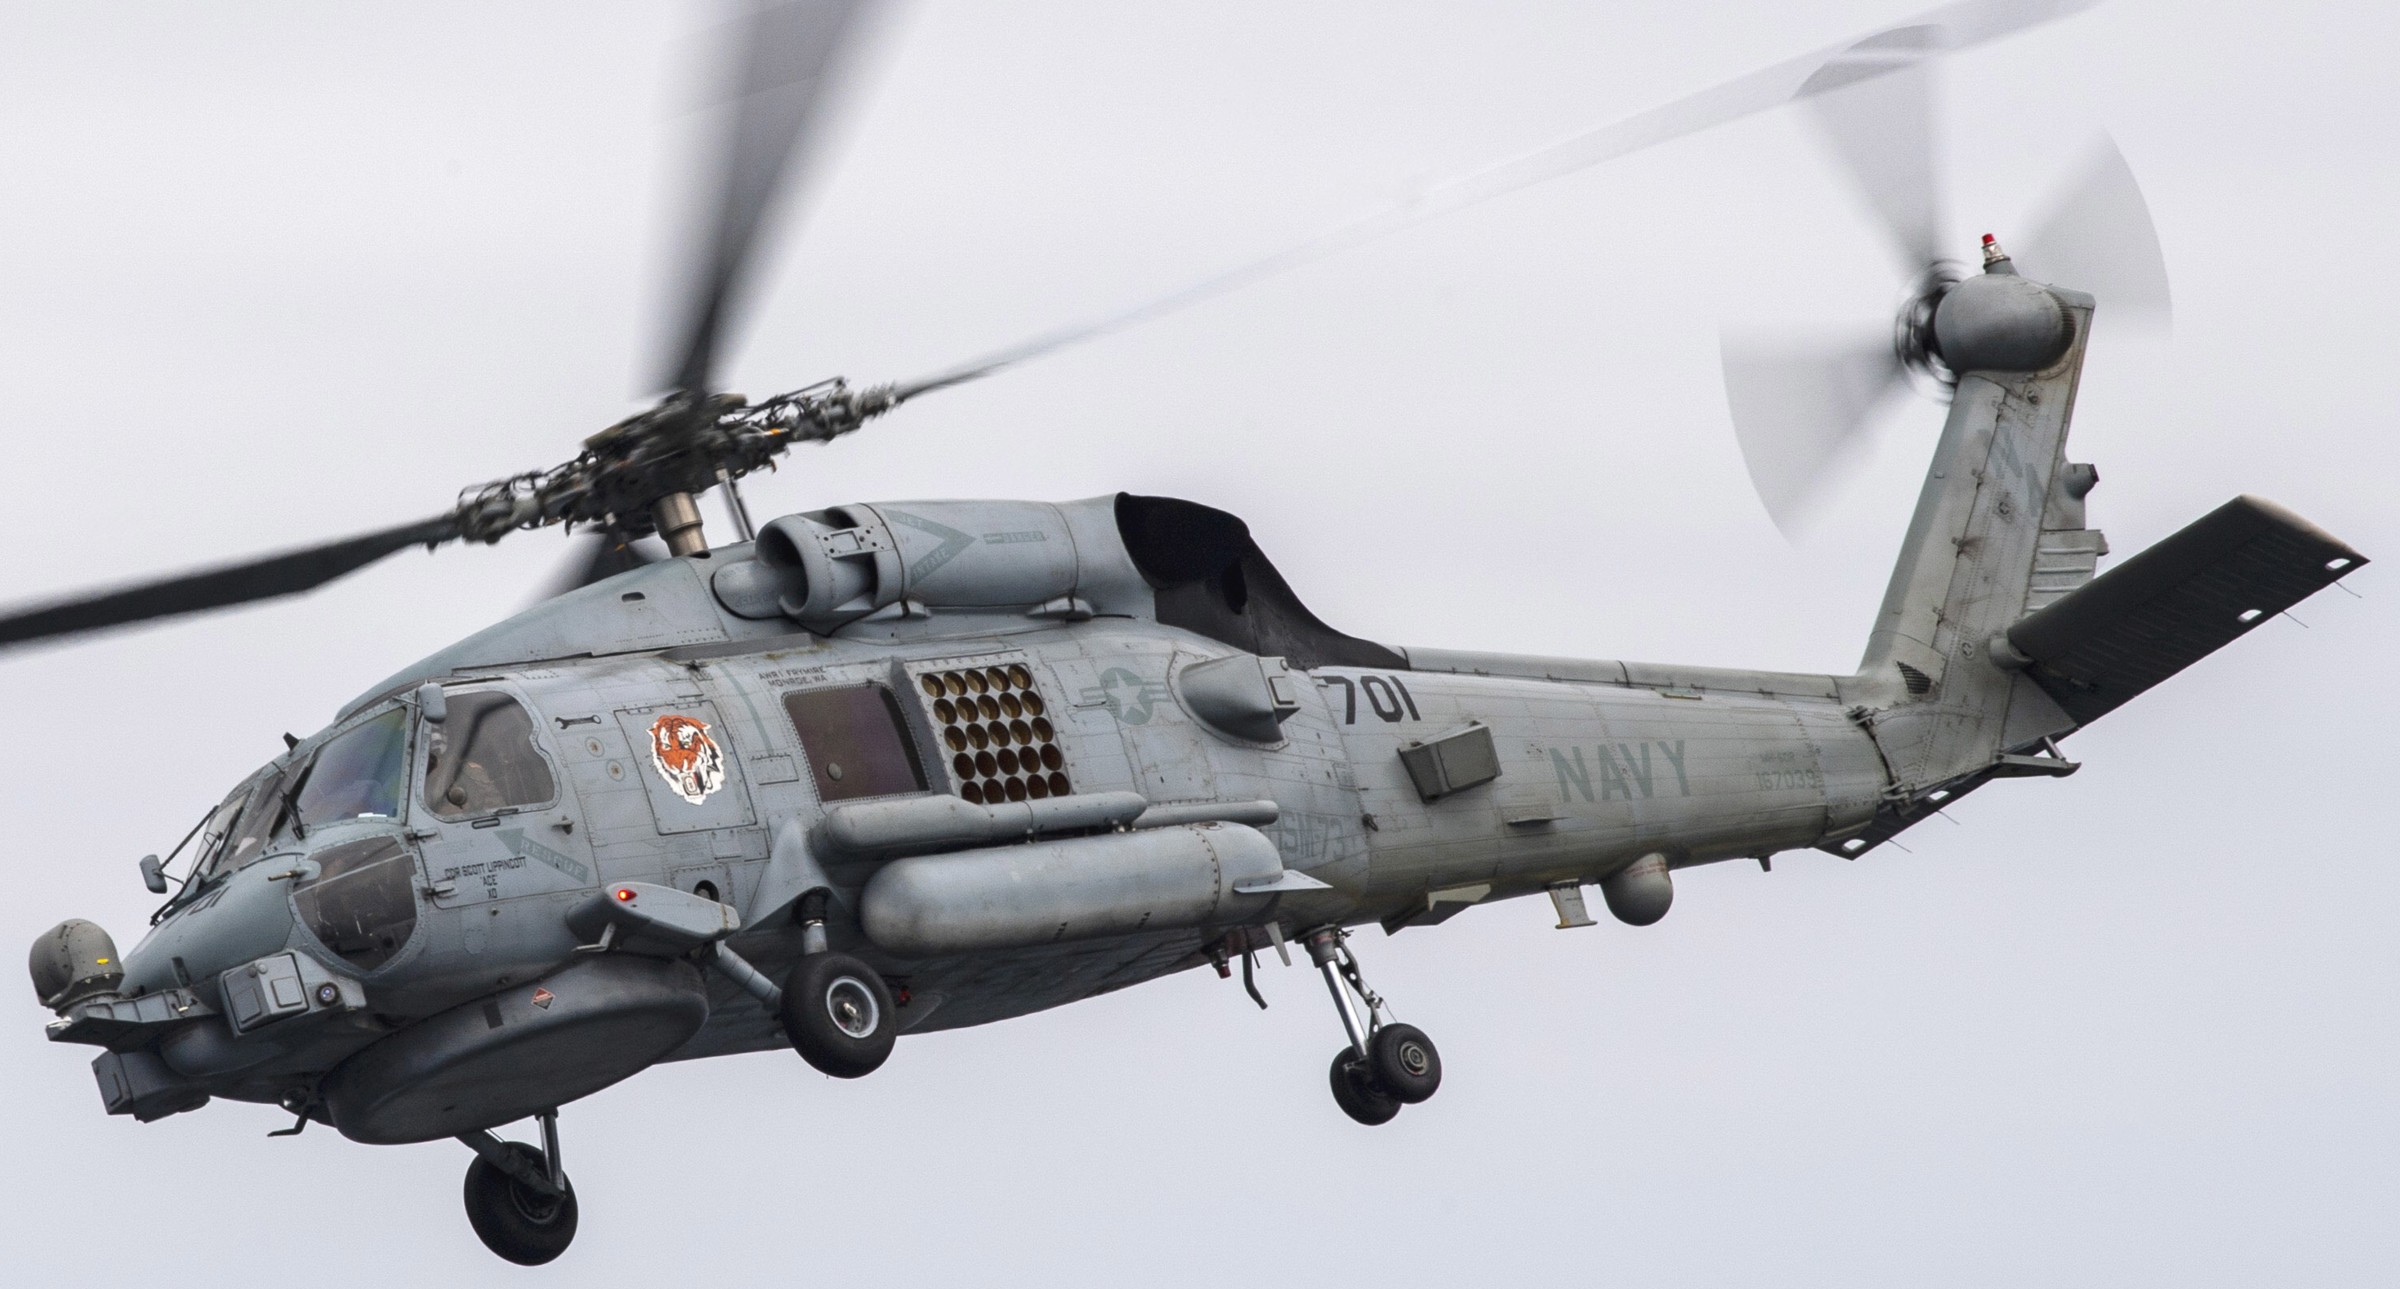 hsm-73 battlecats helicopter maritime strike squadron us navy mh-60r seahawk 2013 90